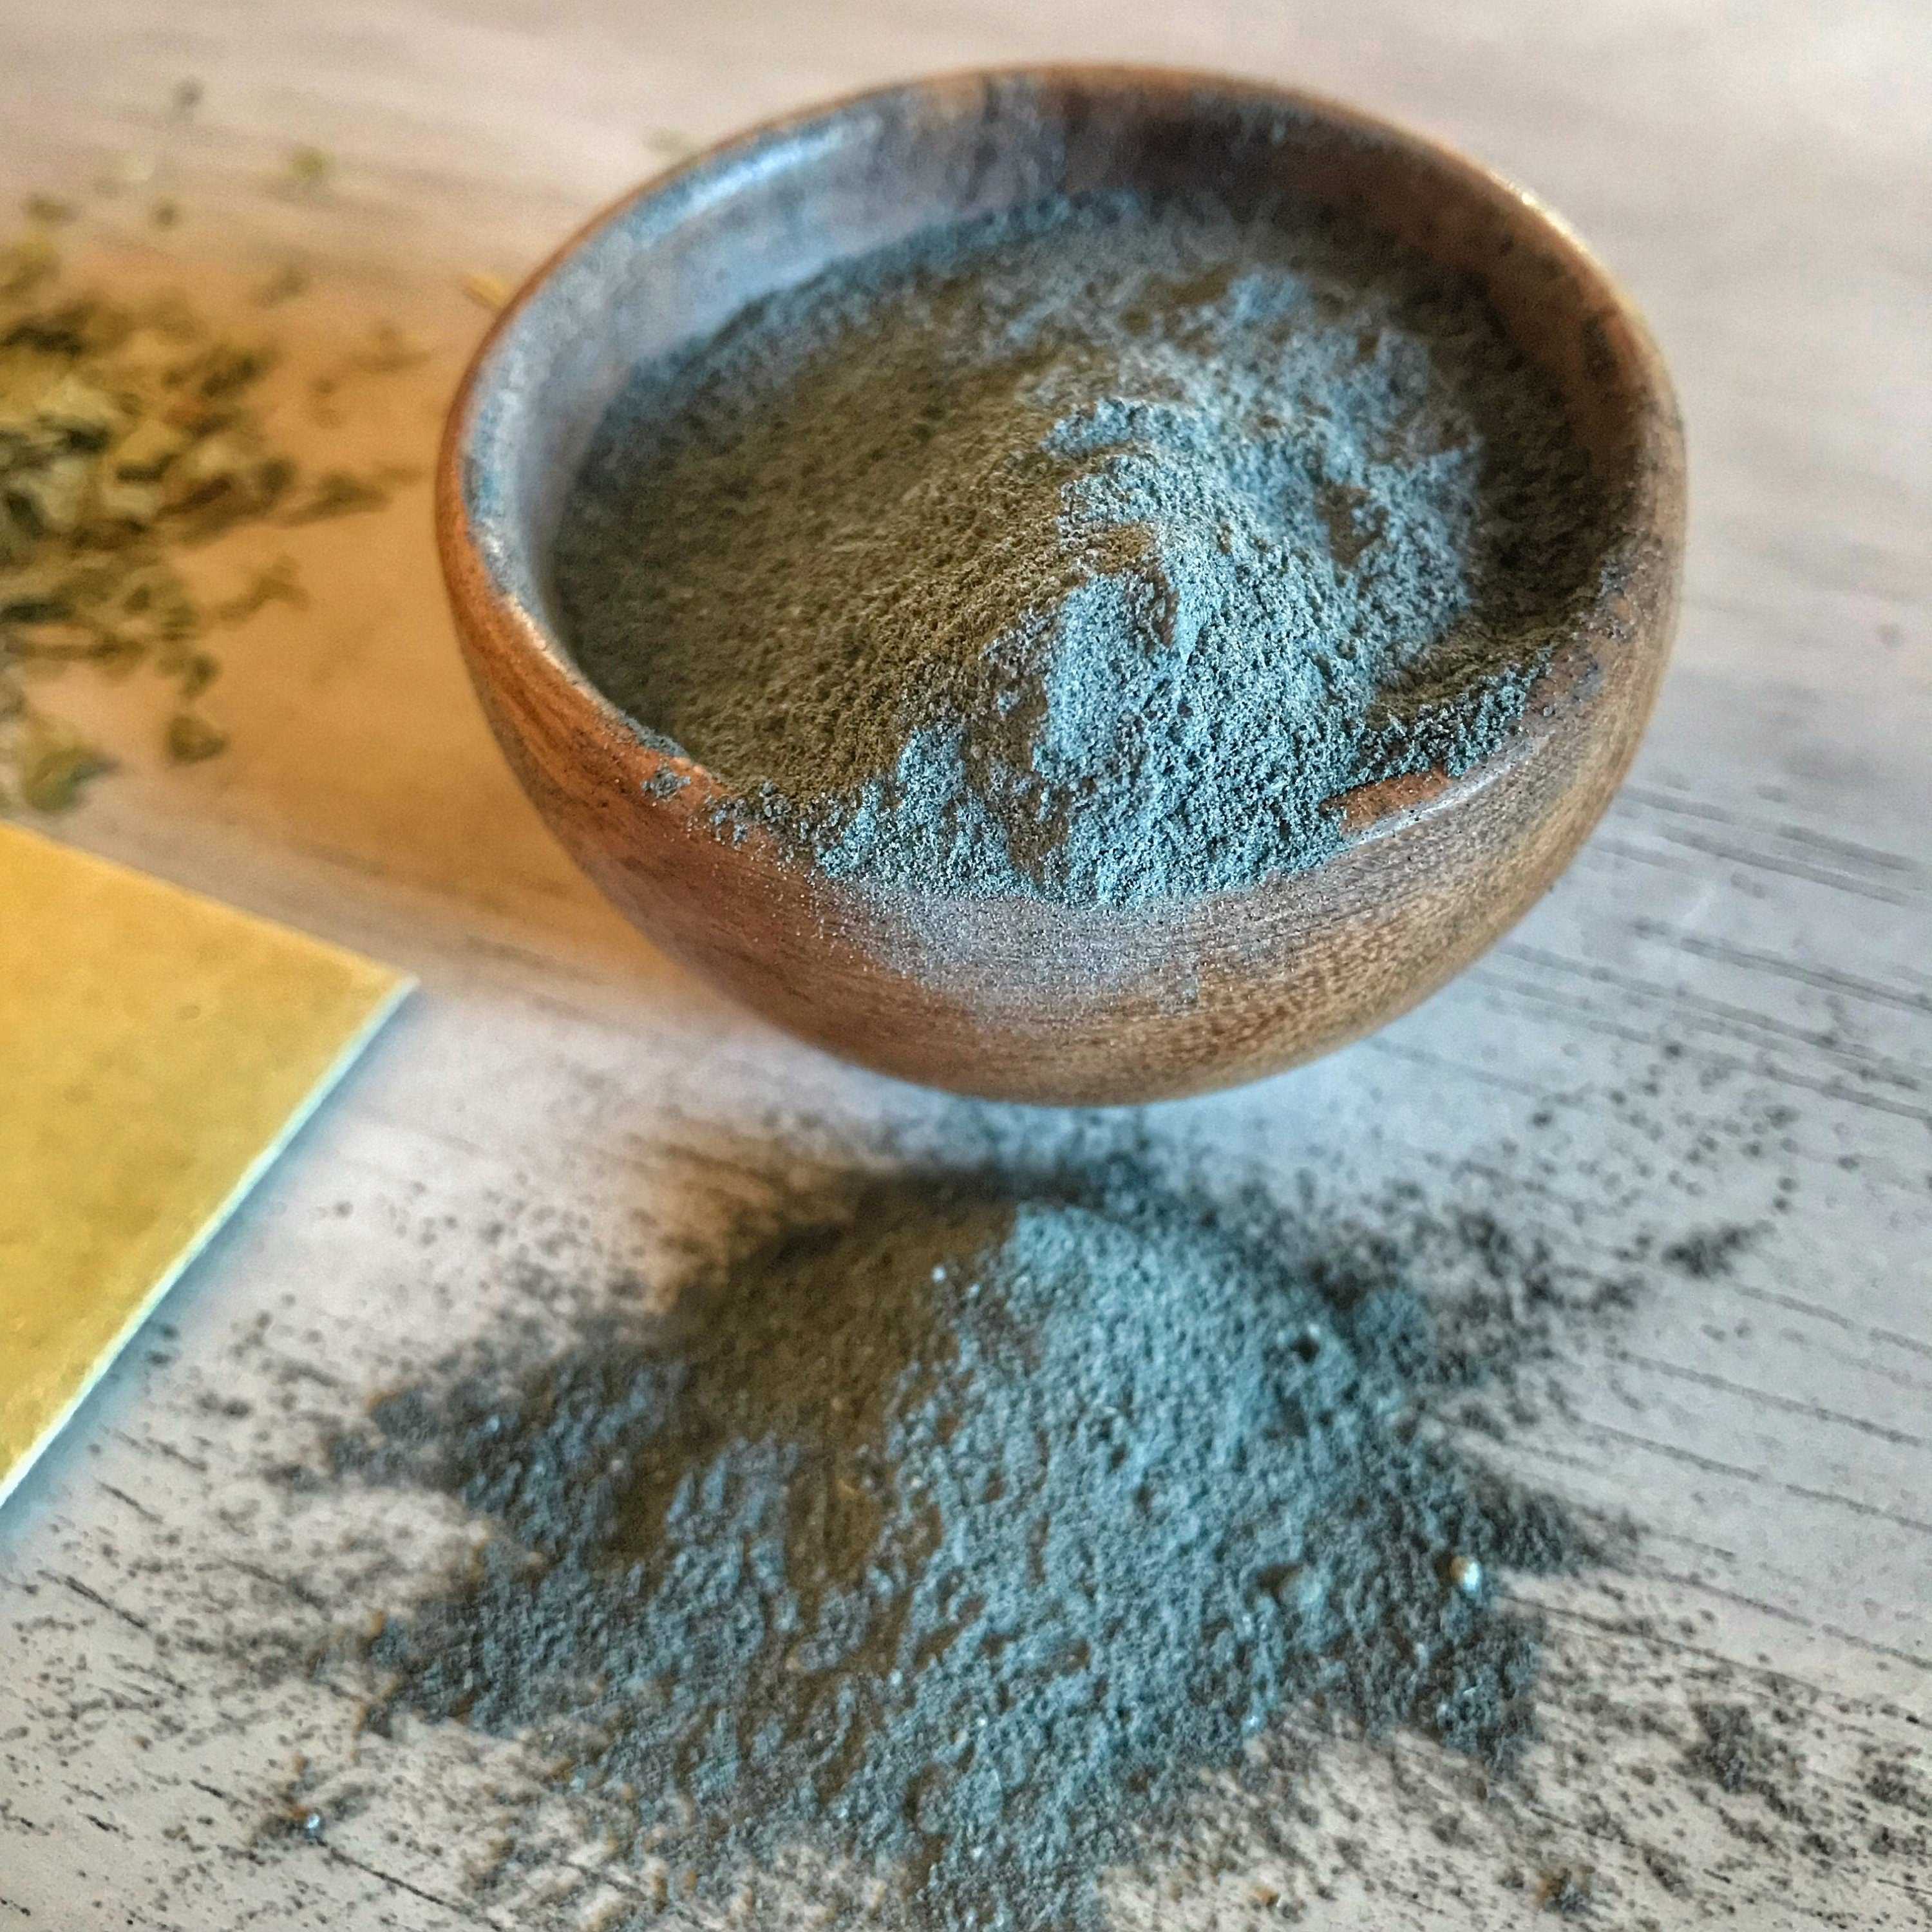 A wooden bowl filled with fine, greenish-gray Ayurvedic face mask powder on a white wooden background, with some of the powder spilled onto the surface, highlighting the natural texture and color of the product.